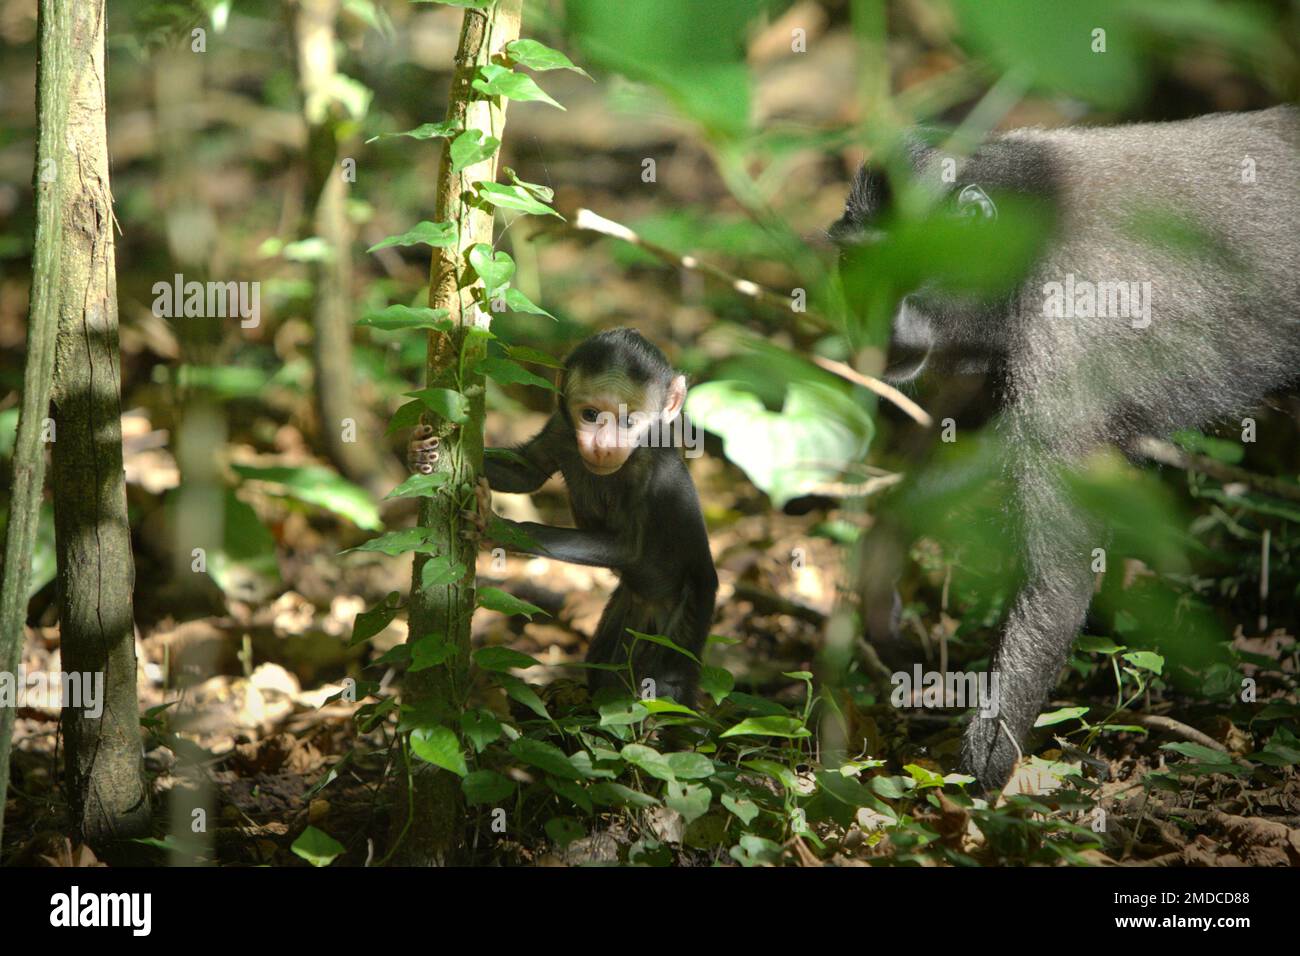 An offspring of Sulawesi black-crested macaque (Macaca nigra) is standing on forest floor as an adult female individual is closely watching during a weaning period in Tangkoko Nature Reserve, North Sulawesi, Indonesia. The interactions between ecological and social factors have a significant effect on the survival of crested macaque offsprings, according to a research paper by scientists at Macaca Nigra Project. One of the main social factors is the number of females in the group. 'Crested macaque groups with more adult females are better able to defend resources against other groups,' Stock Photo